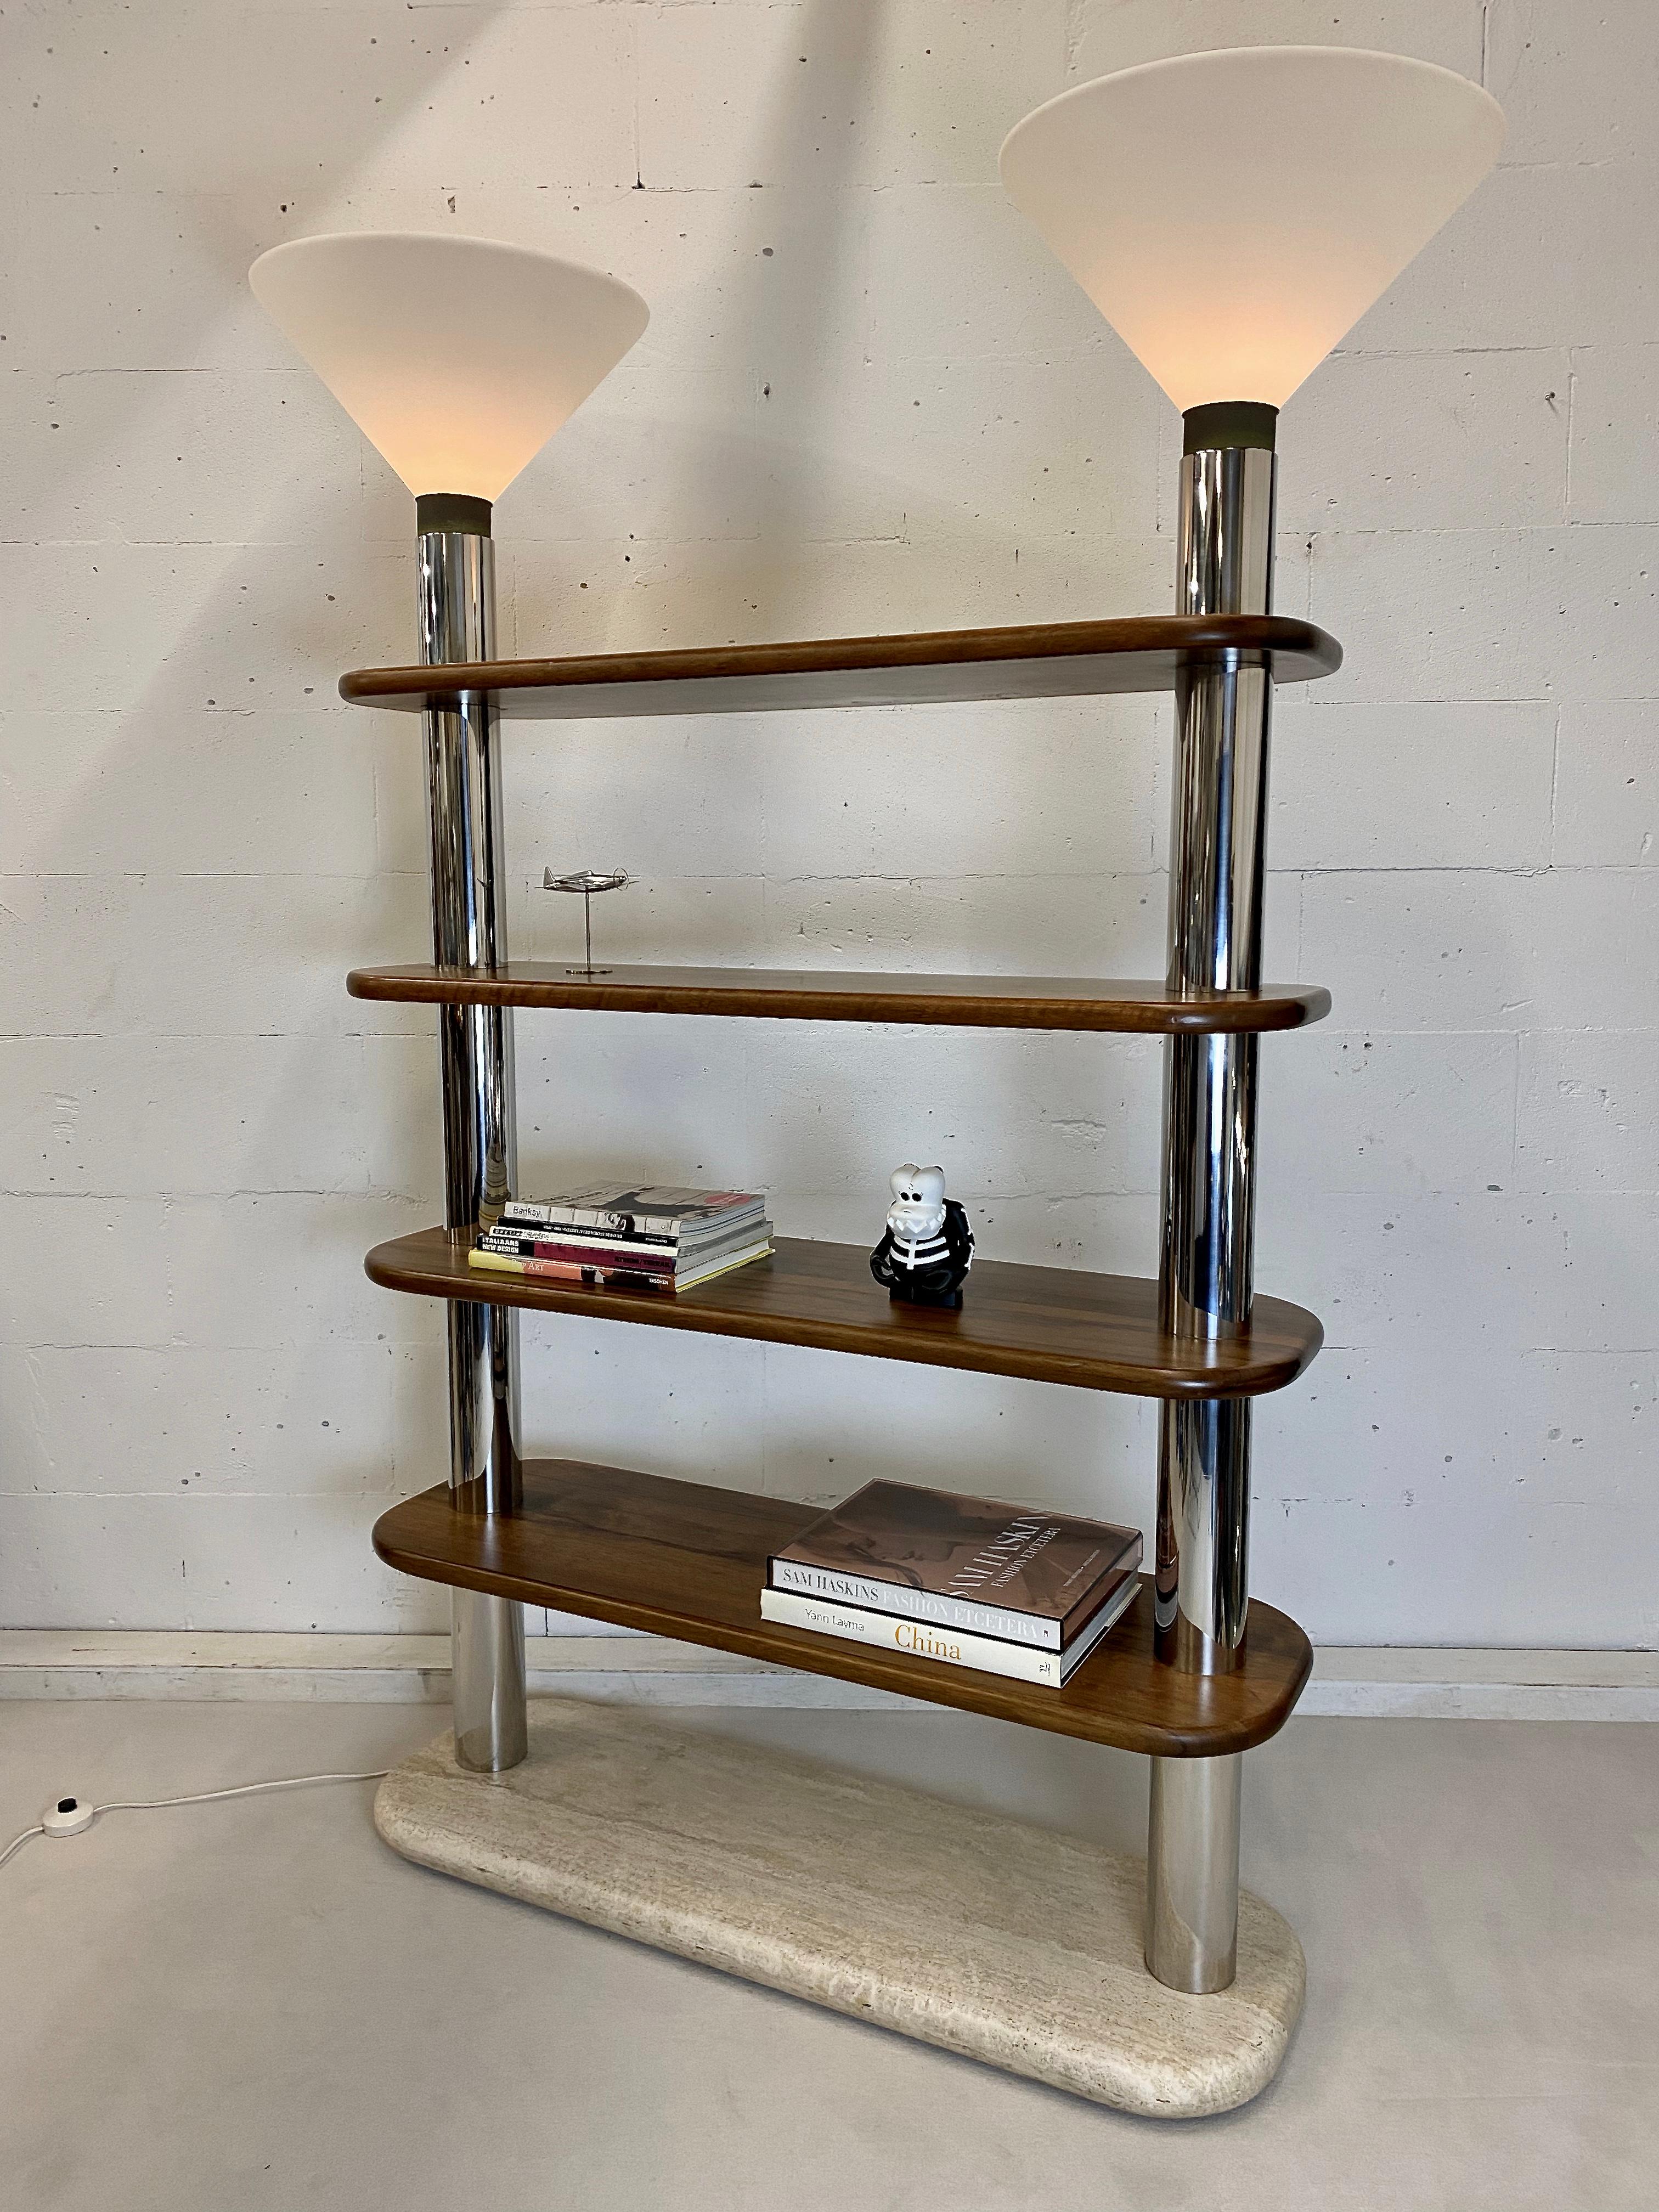 Stylish and sleek Italian made post modern bookcase / etagere with oversized Lamp shades. 
This rare piece is in fantastic condition. It is made of a solid Travertine base and wooden shelves which are connected with polished stainless steel tubes.